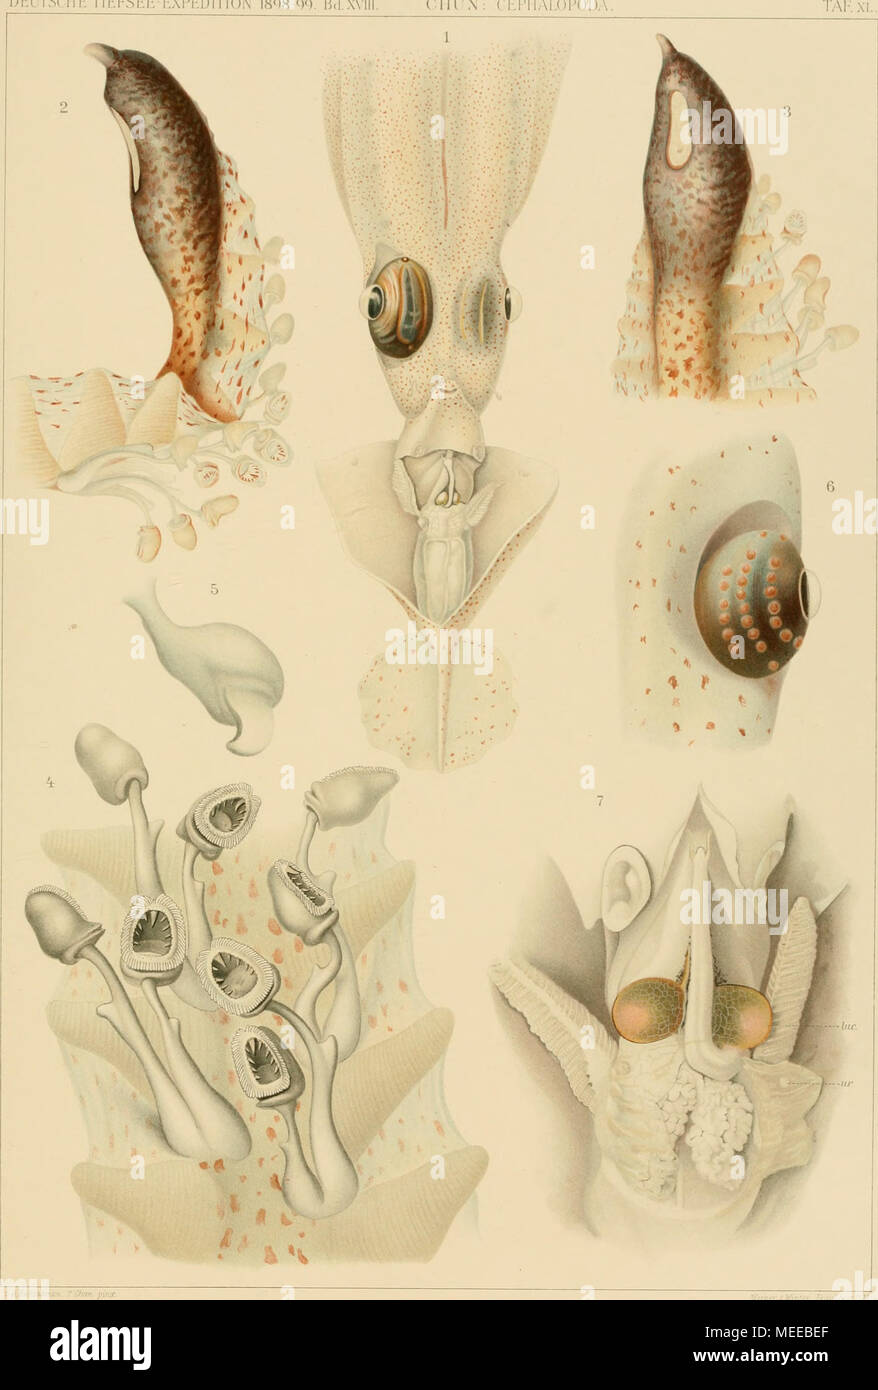 . Die Cephalopoden . Taf. XL. I Chiroteuthis Veranyi Feruss. 2-5, 7 Chiroteuthis Imperator n. sp. 6 Chiroteuthis Picteti Jouh. .o.j :':. Stock Photo